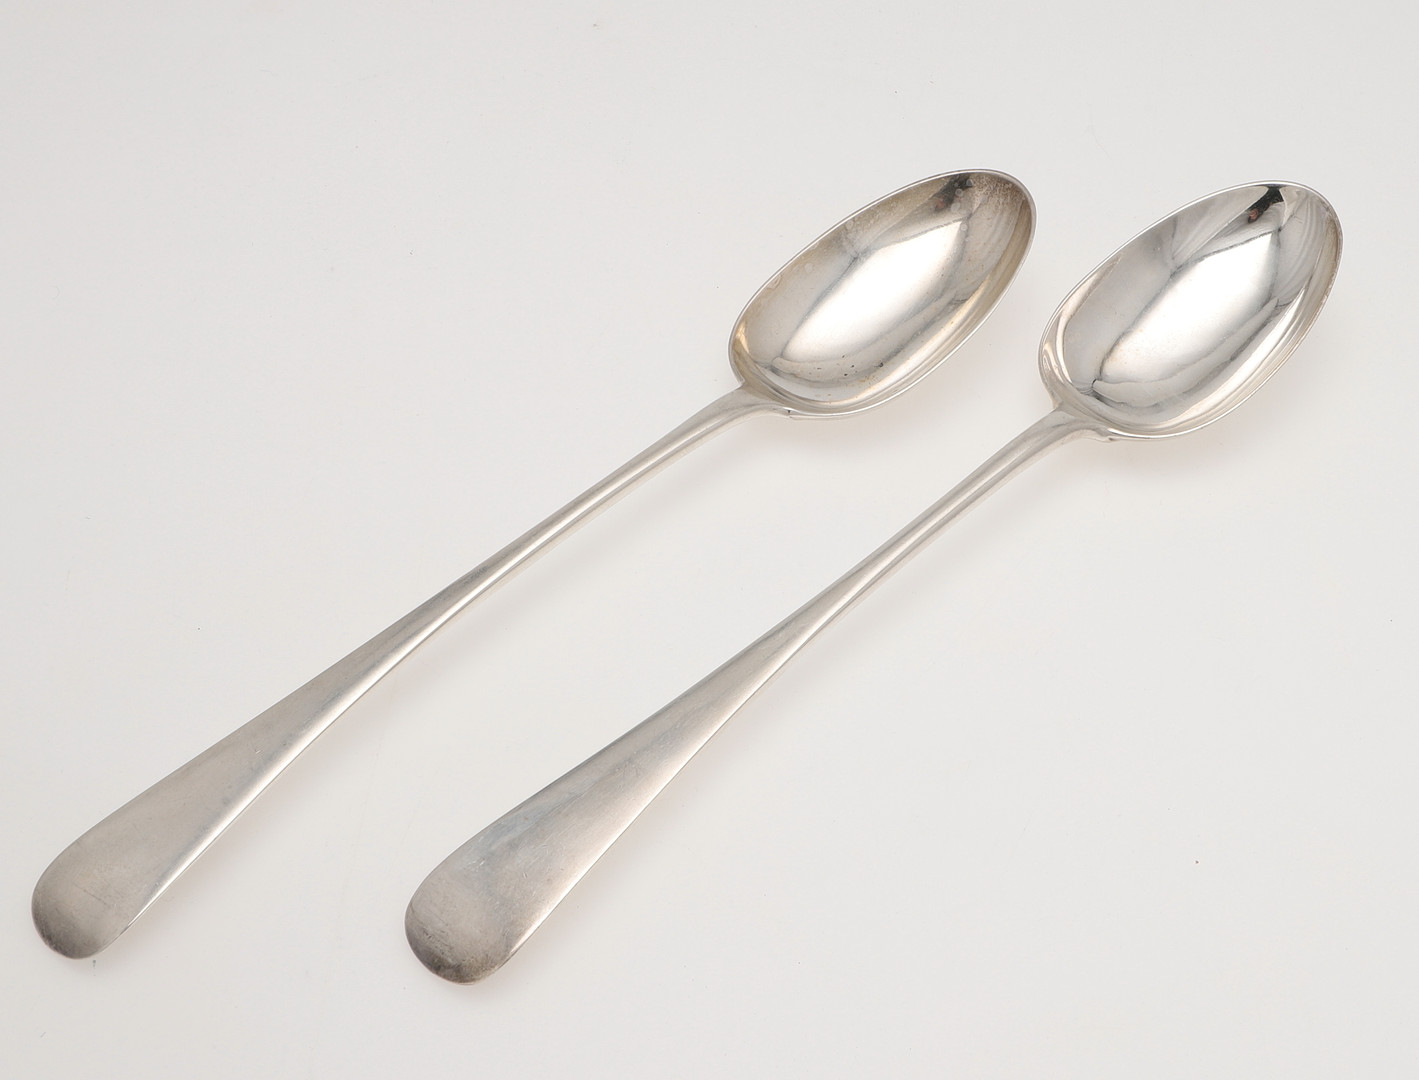 A NEAR PAIR OF LATE VICTORIAN/ EDWARDIAN SILVER SERVING OR BASTING SPOONS. - Image 3 of 5